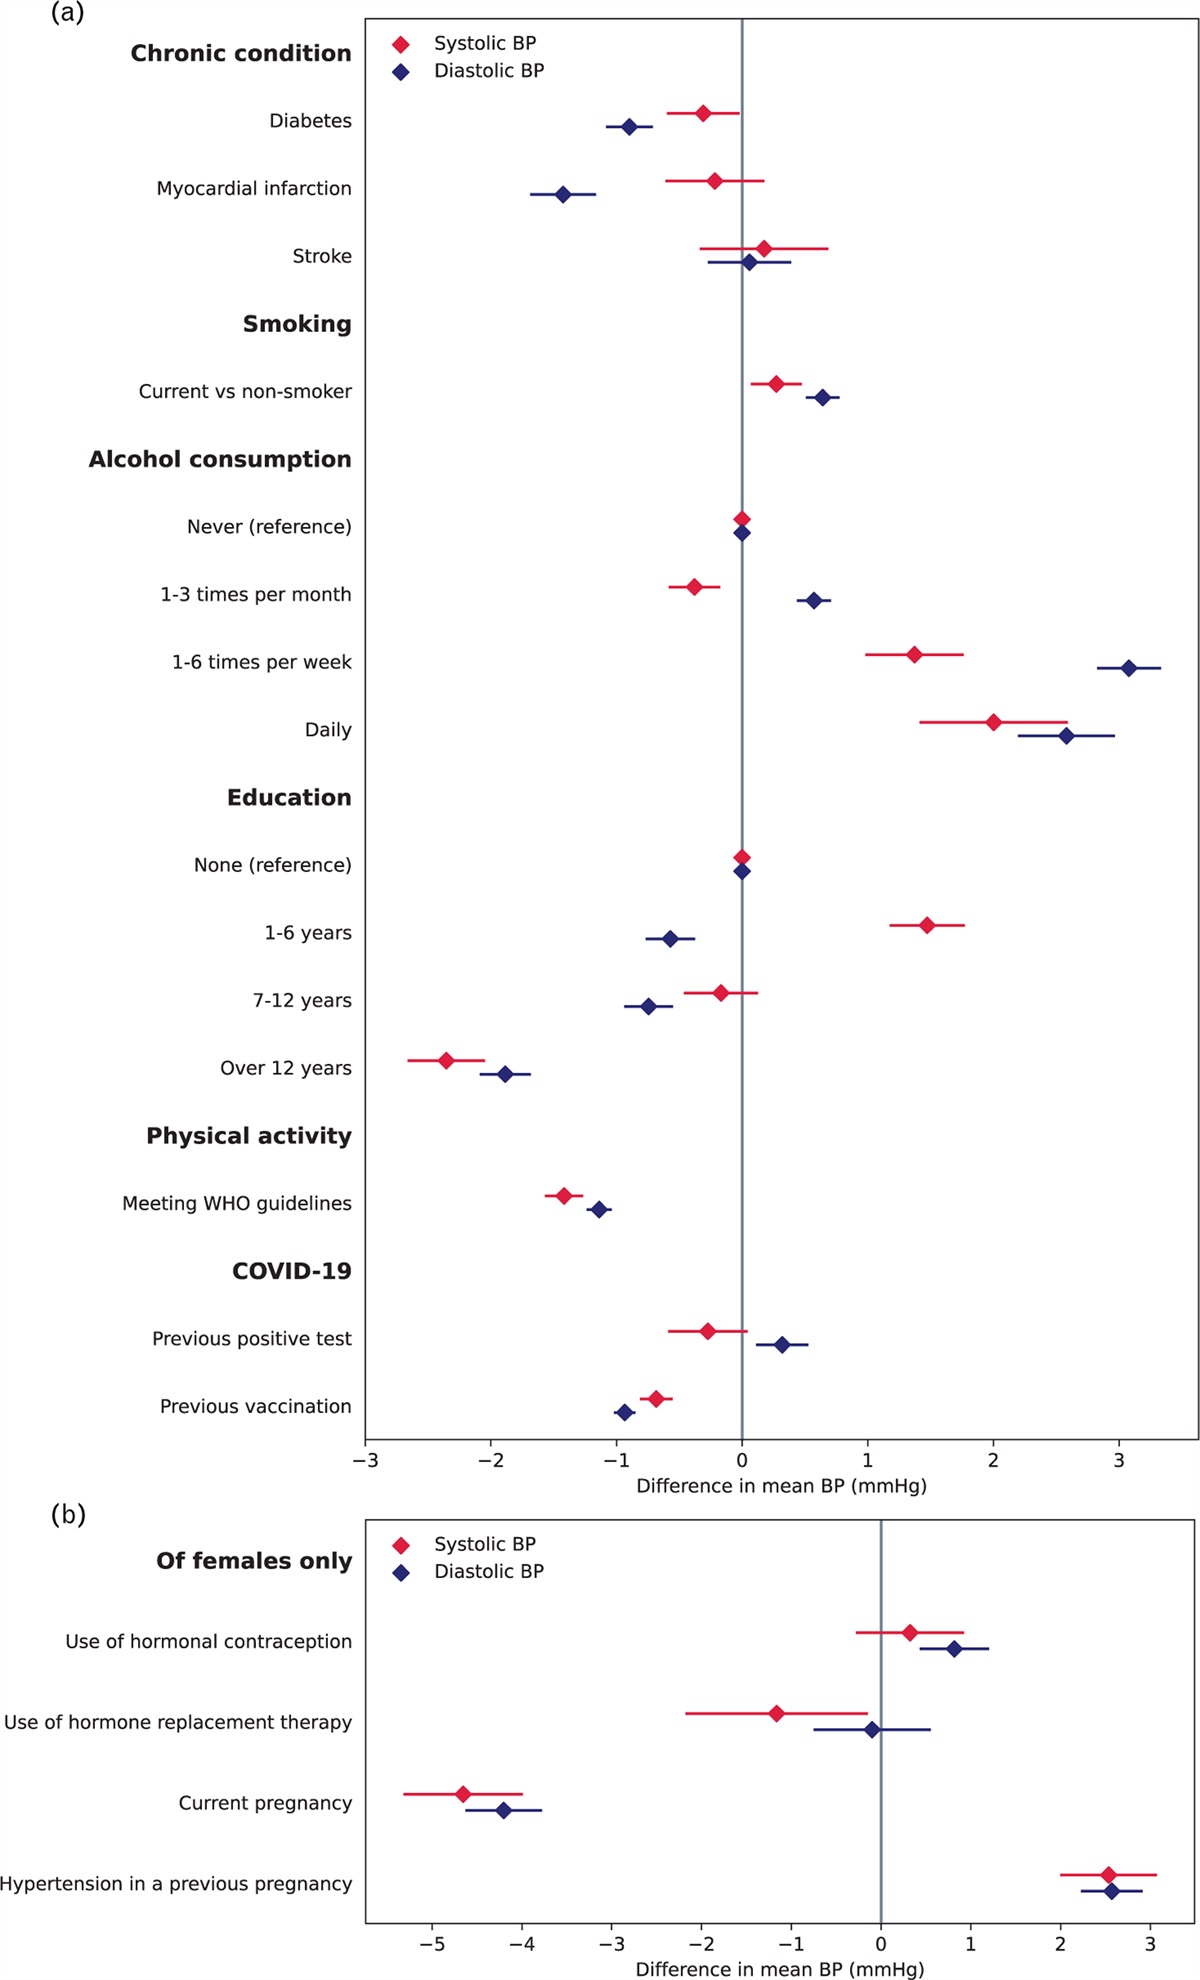 Global blood pressure screening during the COVID-19 pandemic: results from the May Measurement Month 2021 campaign